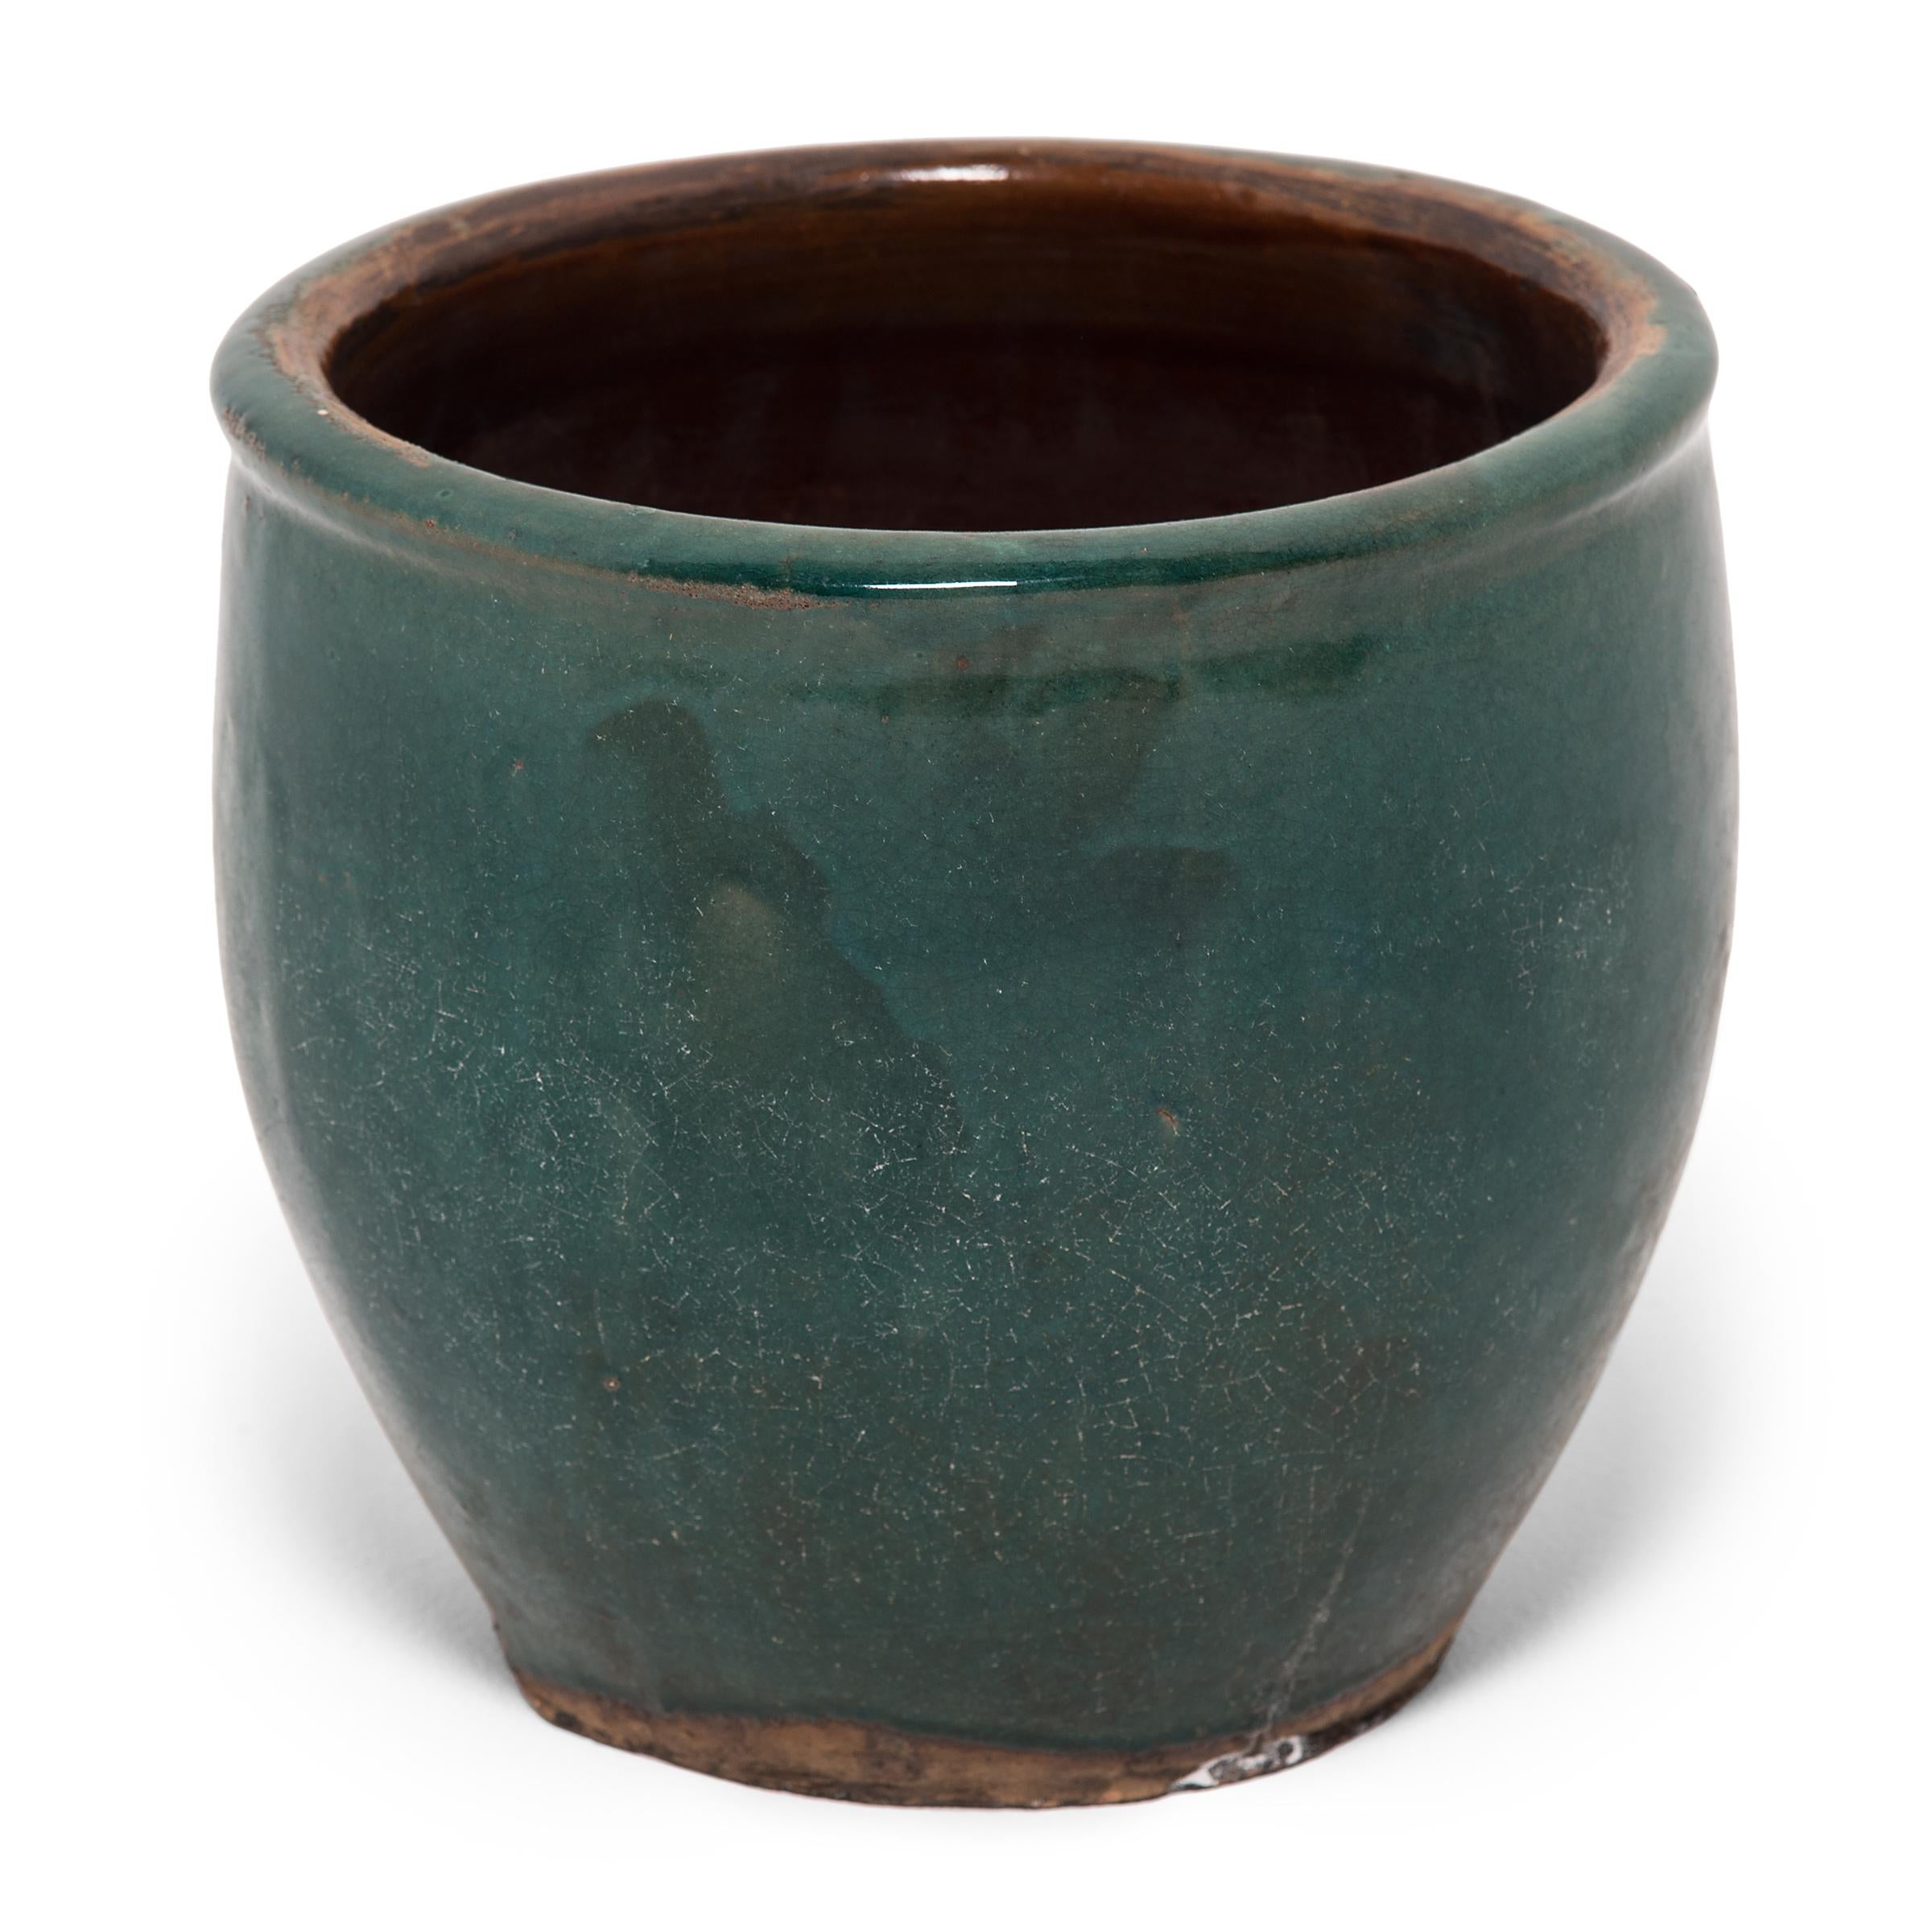 A luminous blue-green glaze sheets, pools, and drips down the surface of this pickling pot, lingering beautifully on every imperfection. Masterfully crafted in the late 19th century, this Qing-dynasty jar once used for household storage exhibits a